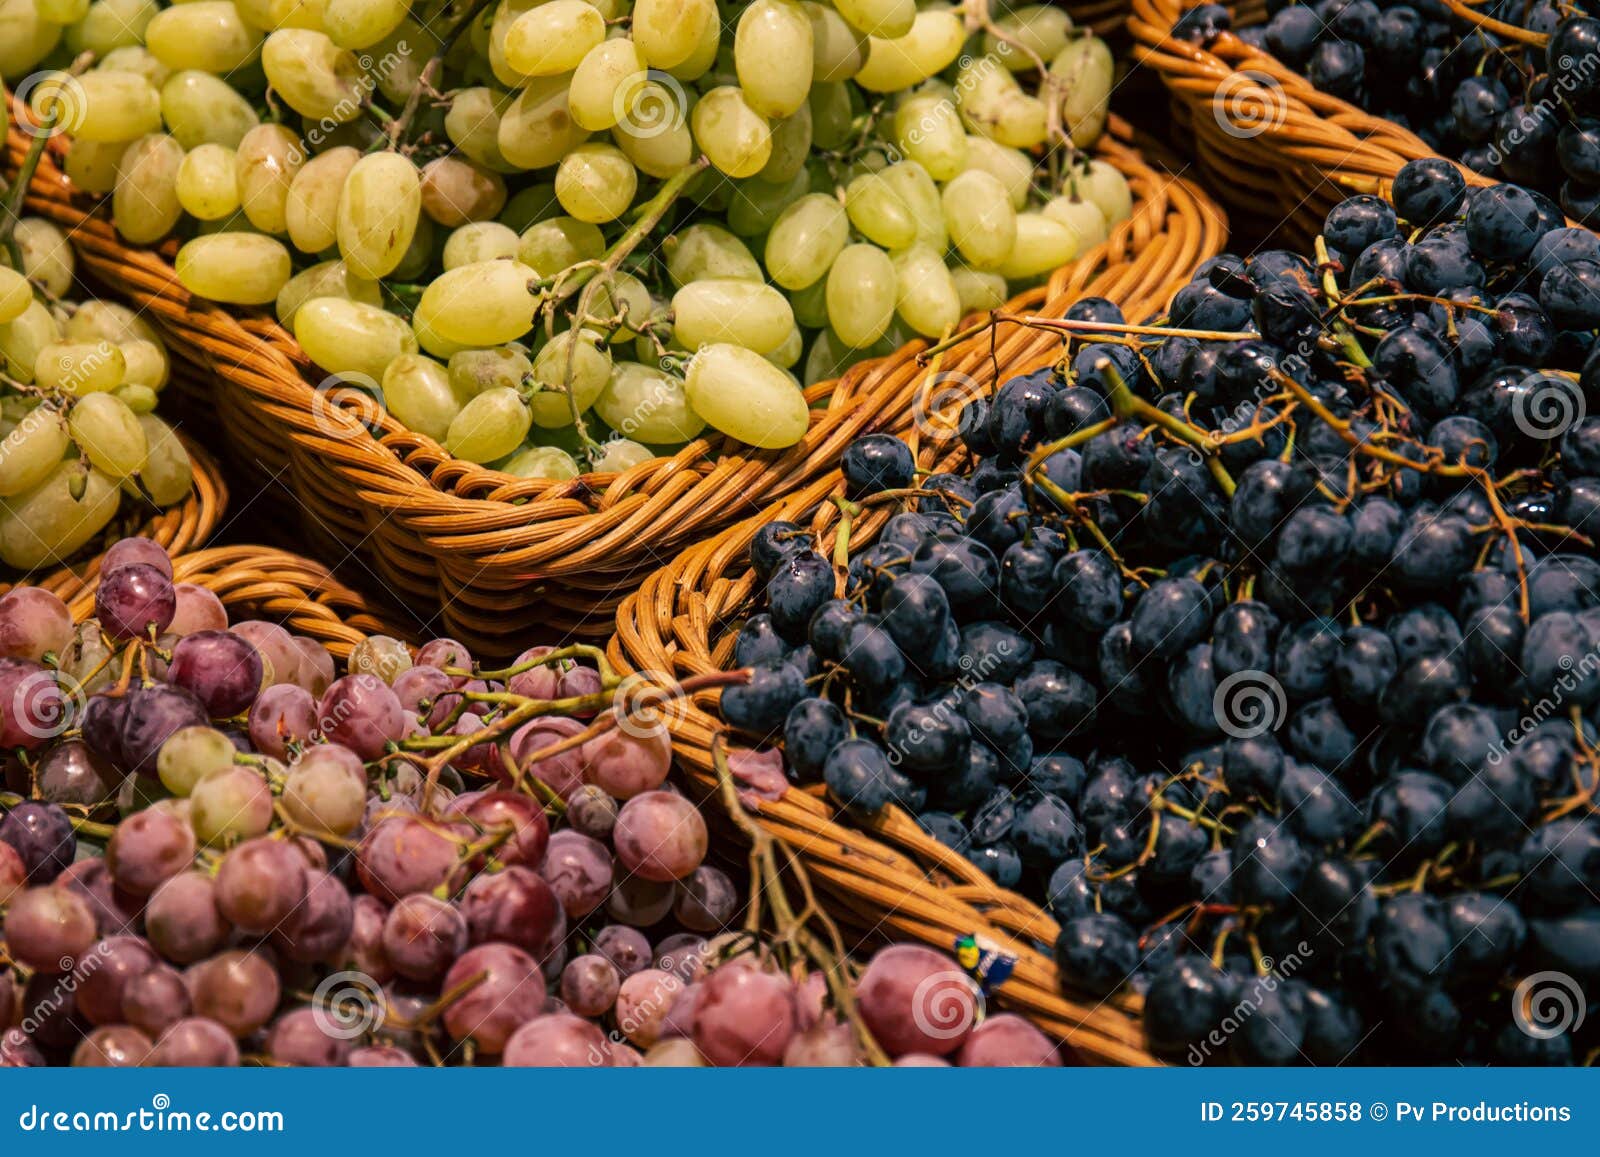 Baskets with Different Types of Grapes on a Supermarket Showcase. Stock ...